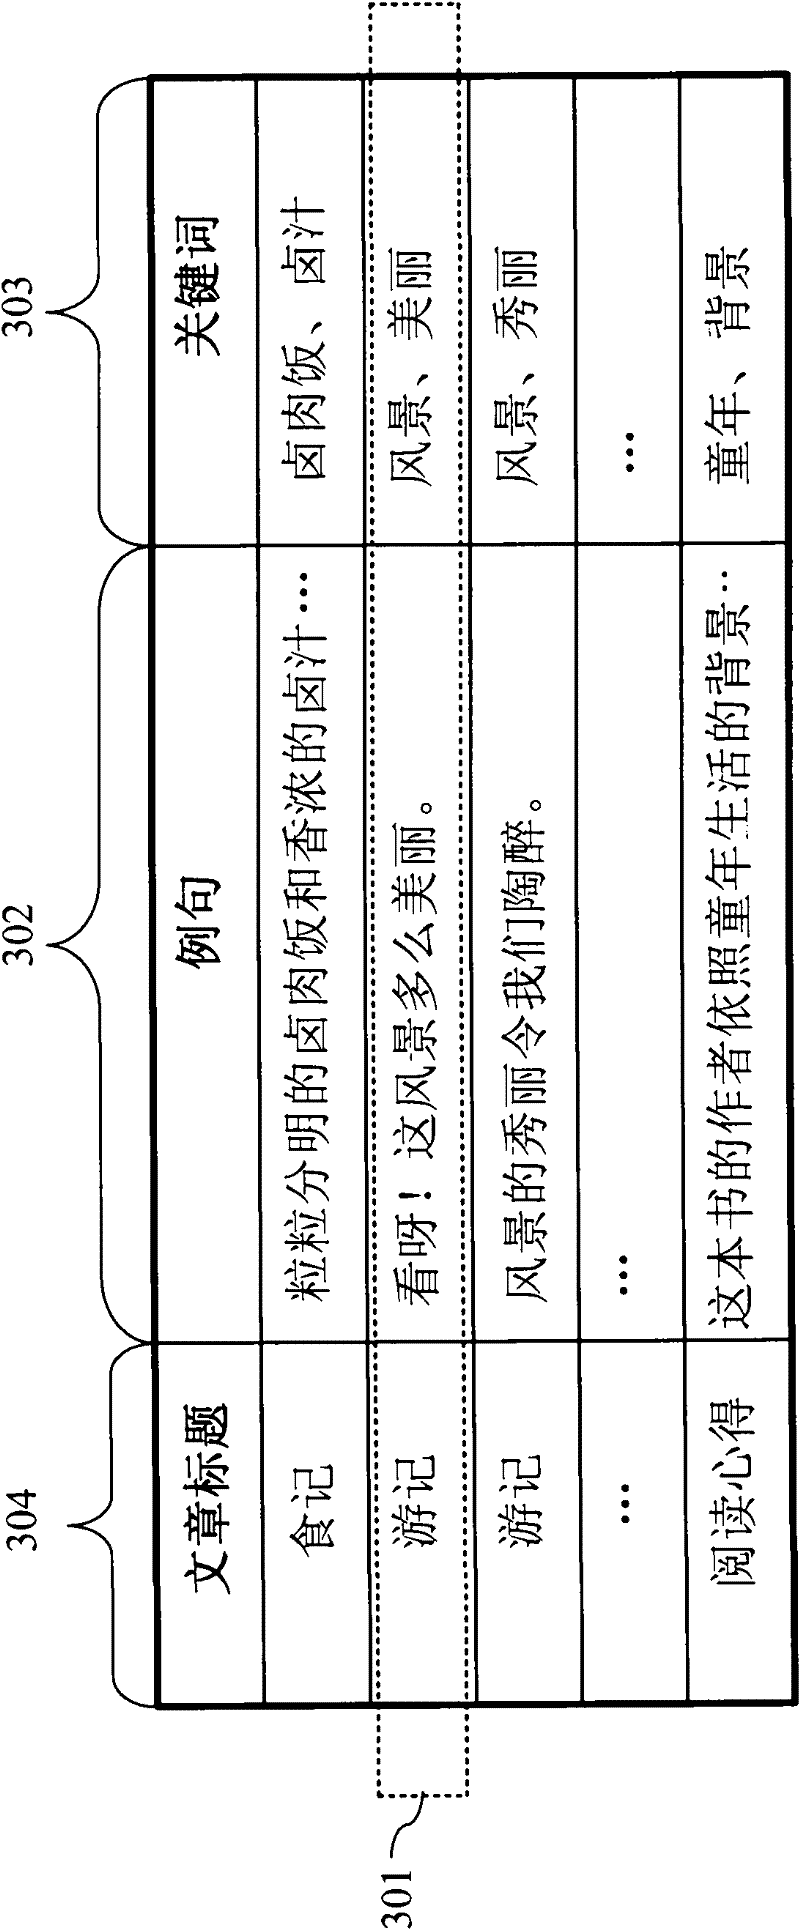 Article Assistant Writing System and Method